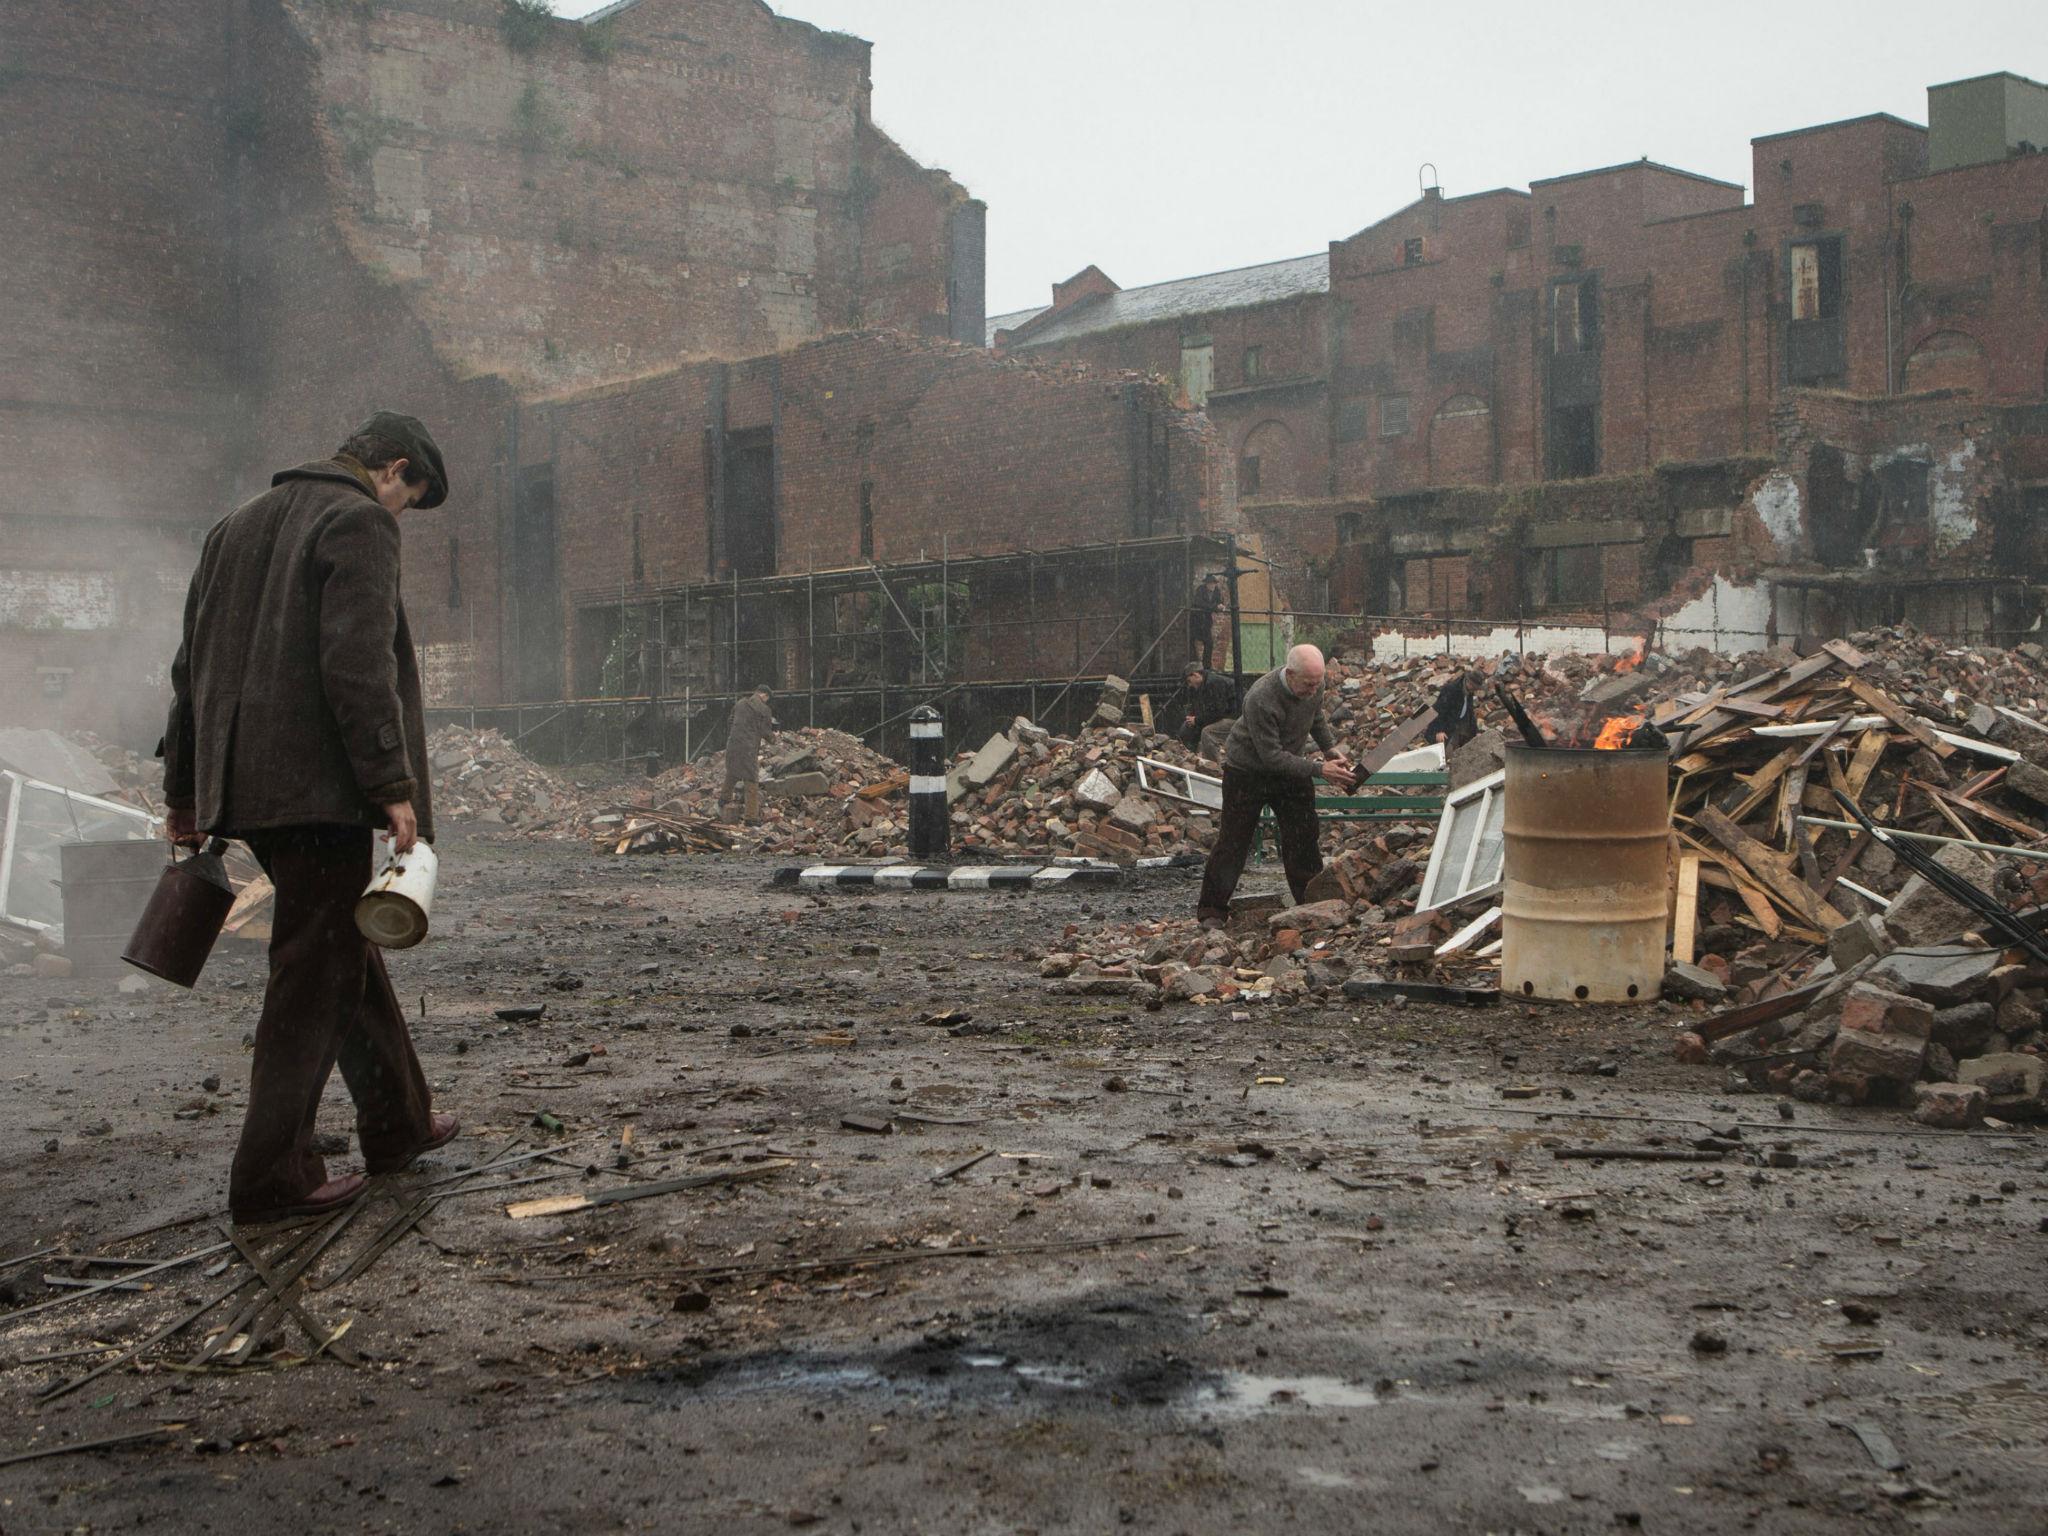 A bomb-damaged London forms the backdrop to the new drama